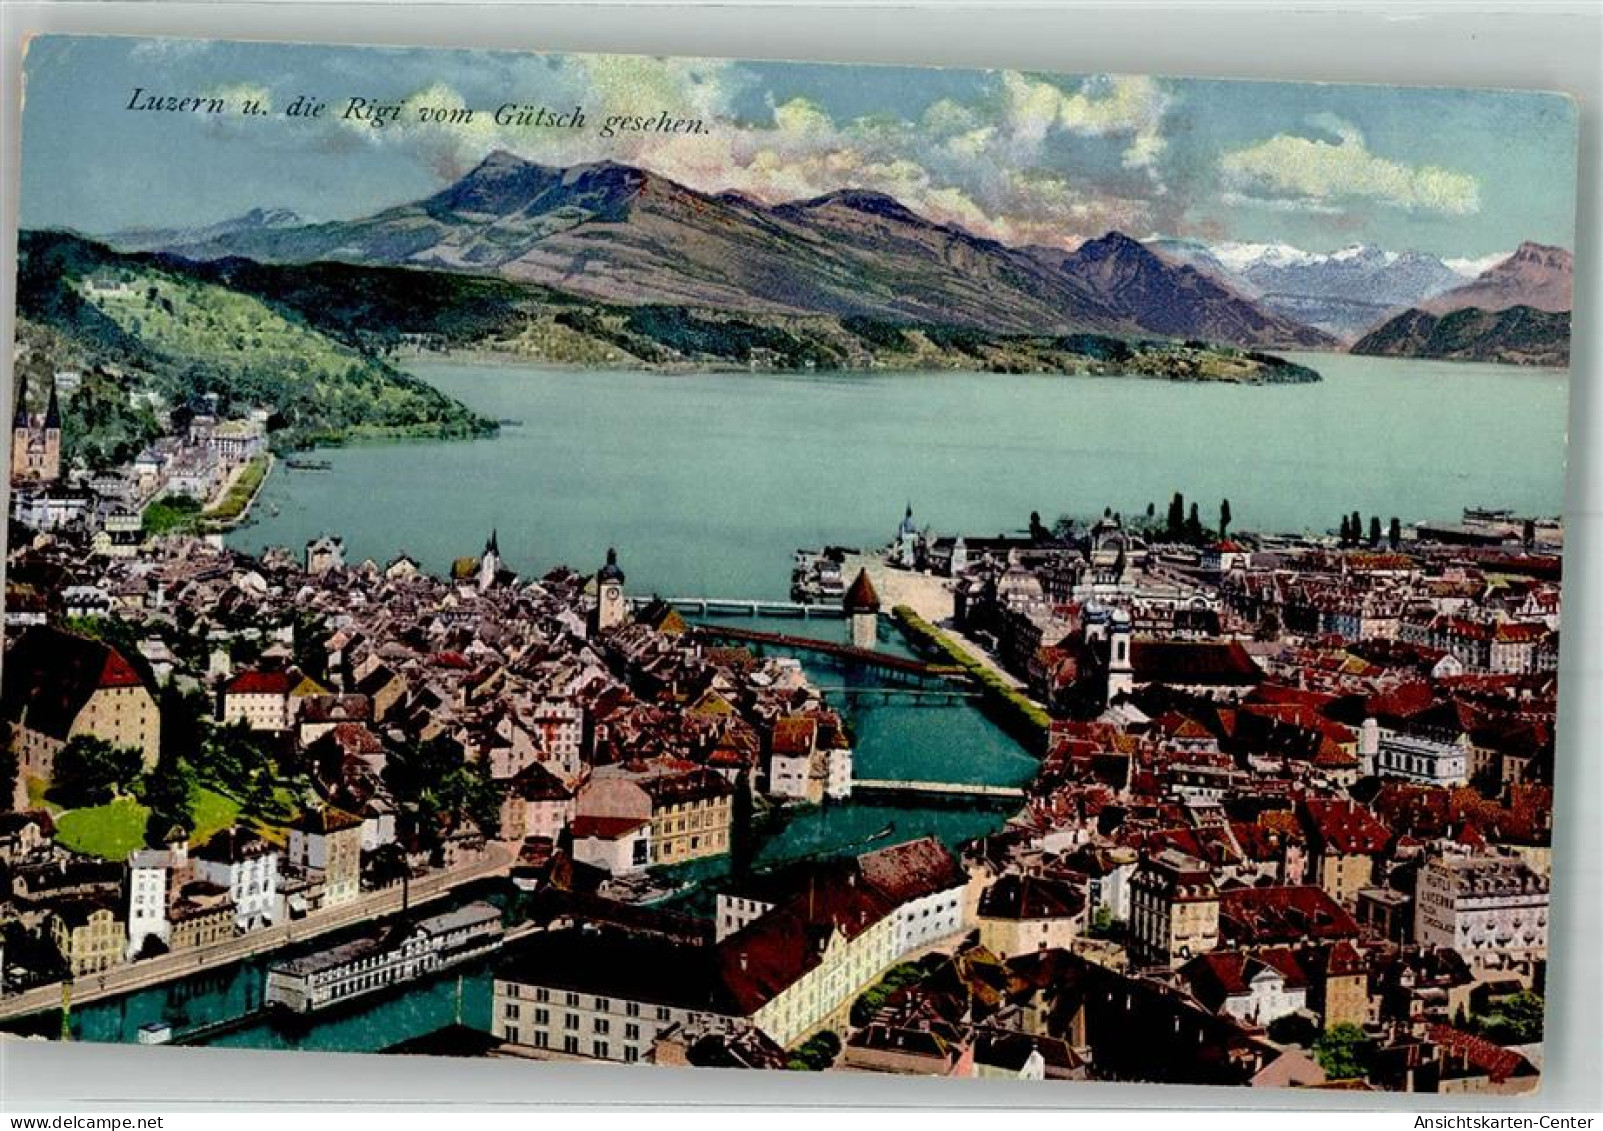 39764811 - Luzern Lucerne - Other & Unclassified